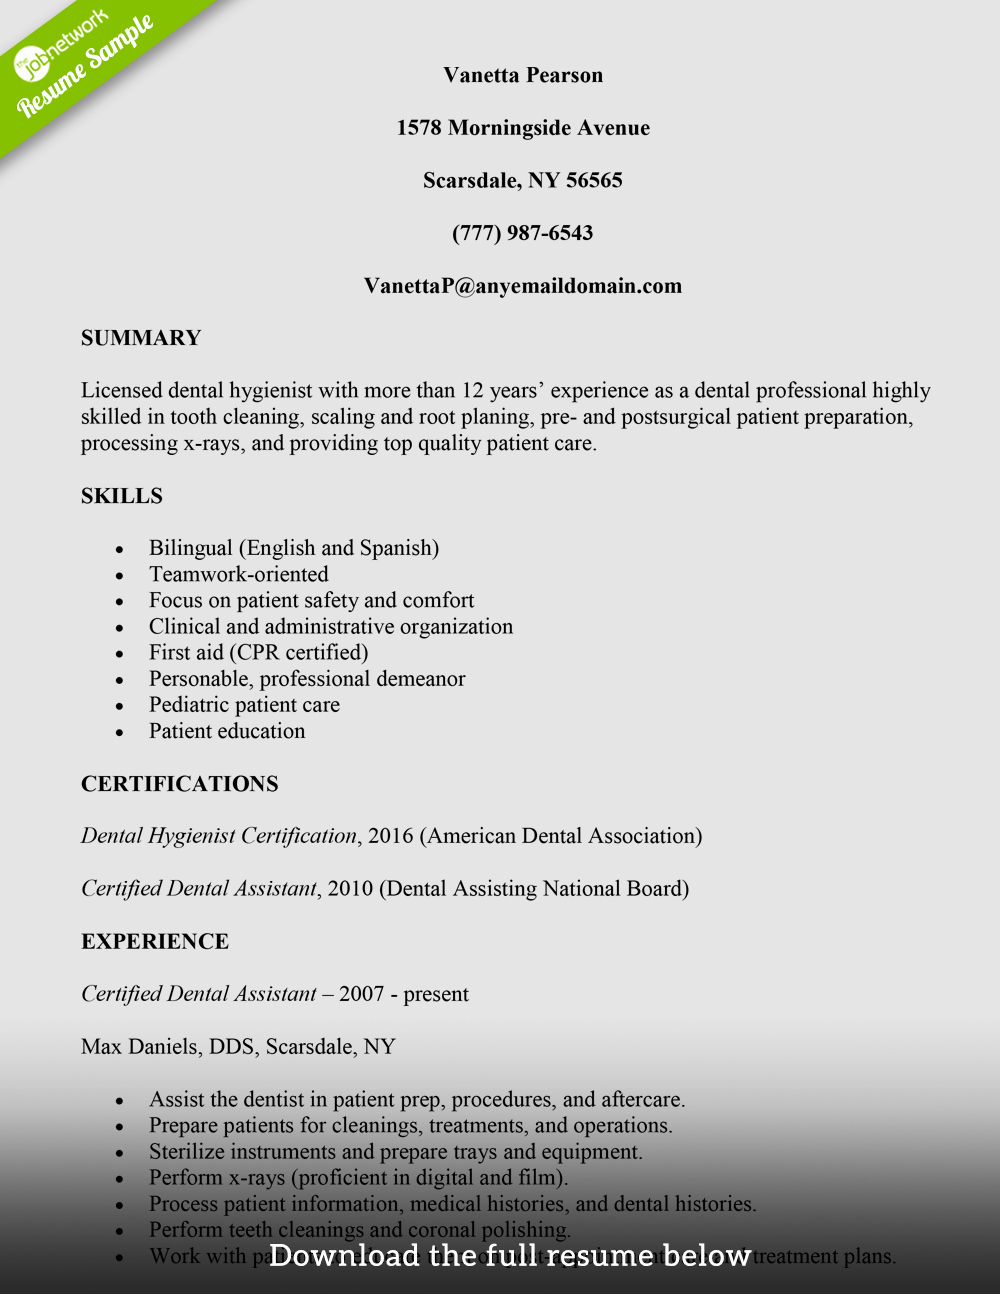 How to Build A Great Dental assistant Resume Examples